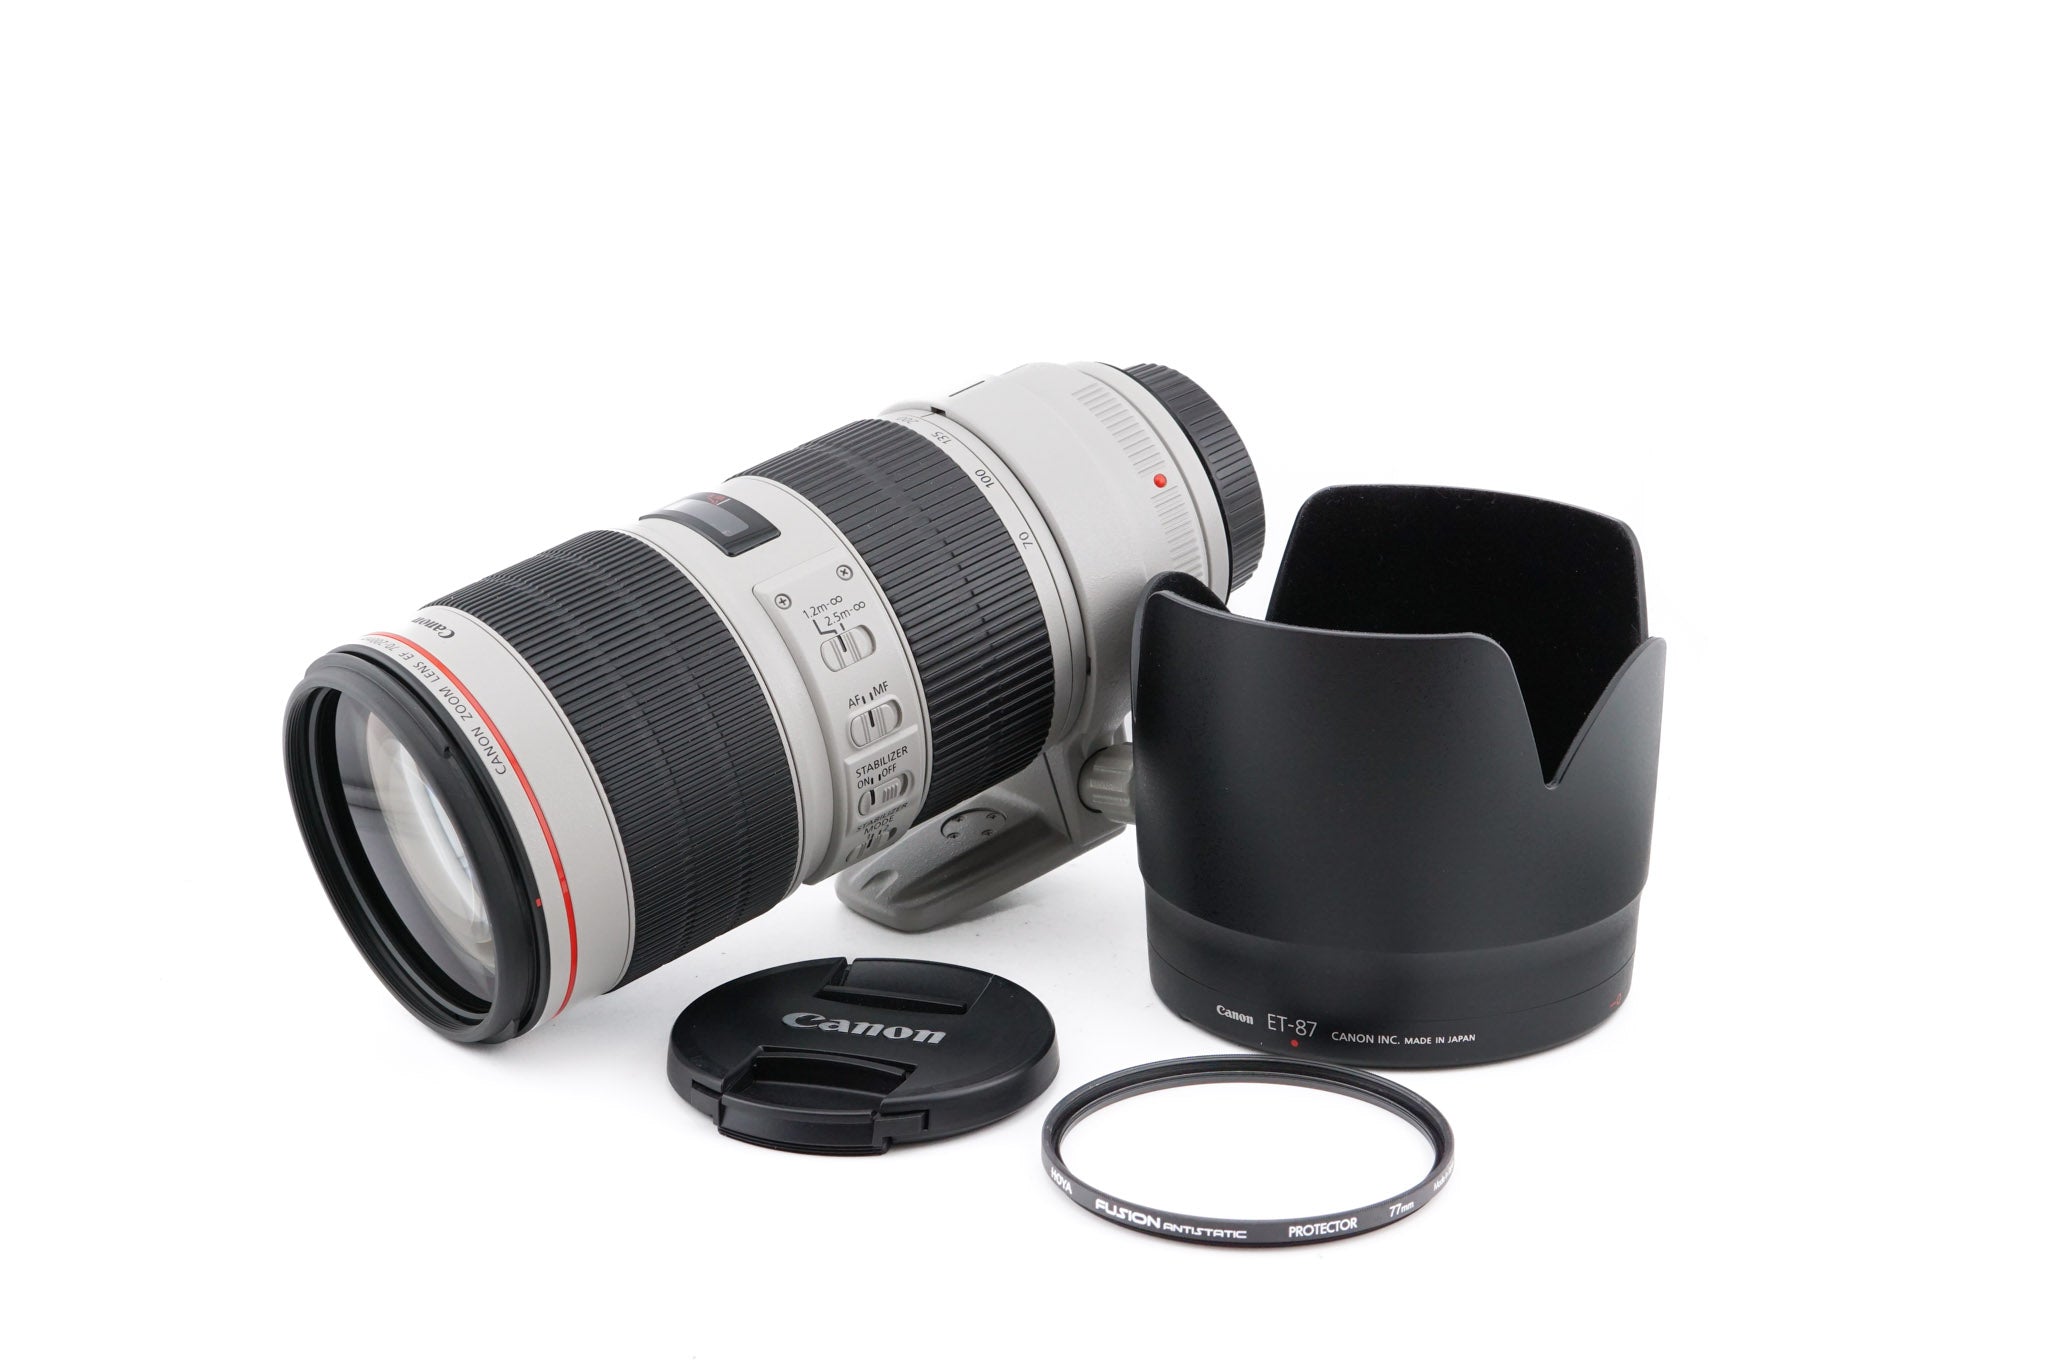 Canon 70-200mm f2.8 L IS III USM